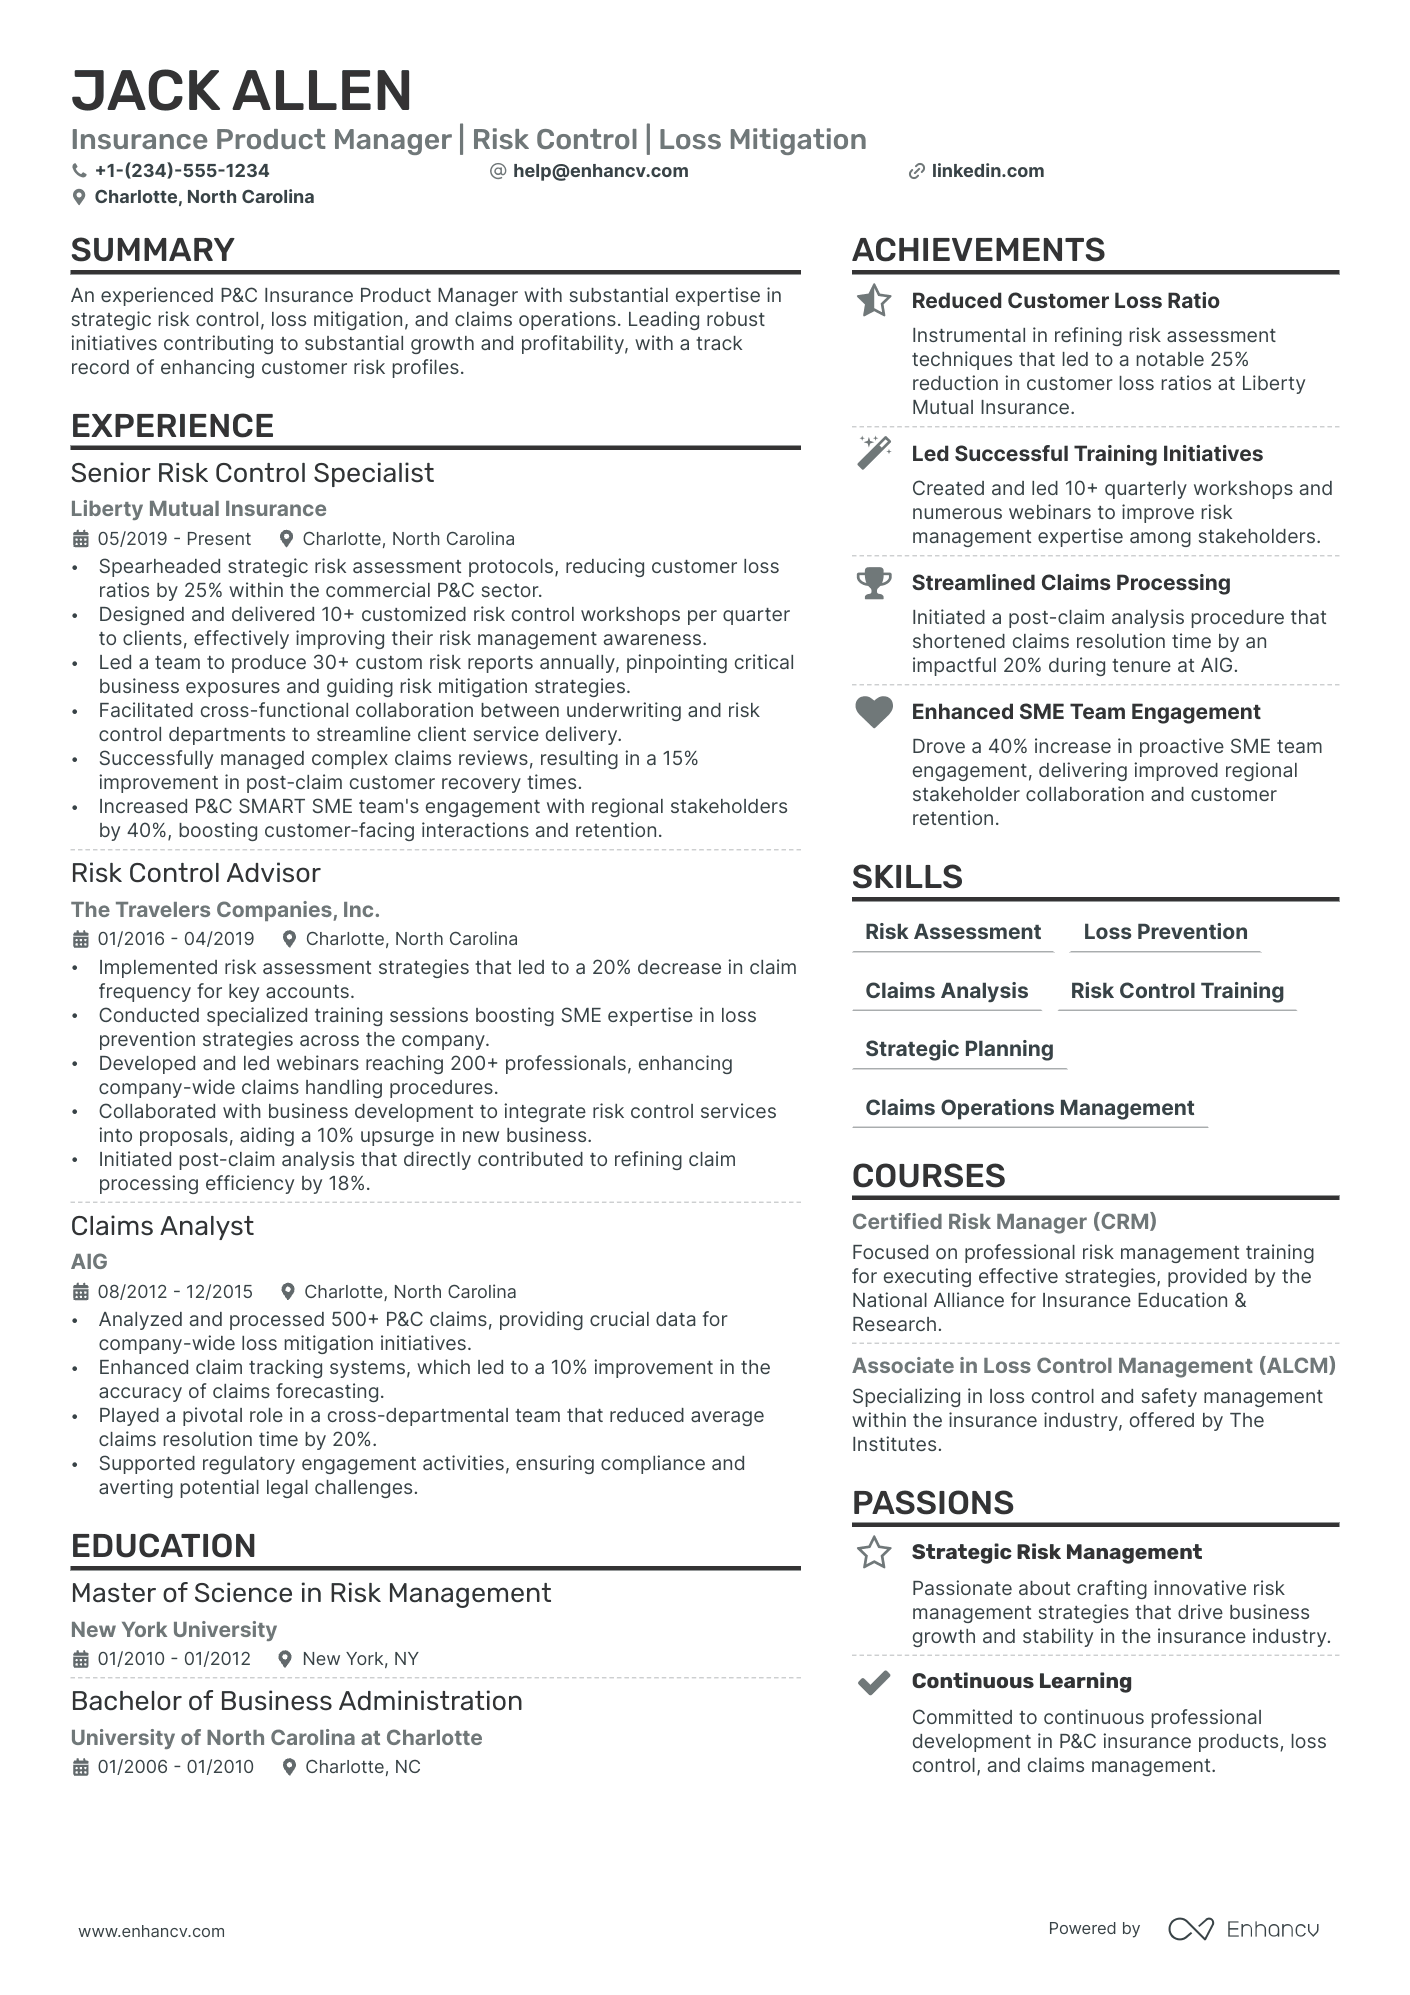 Insurance Product Manager resume example